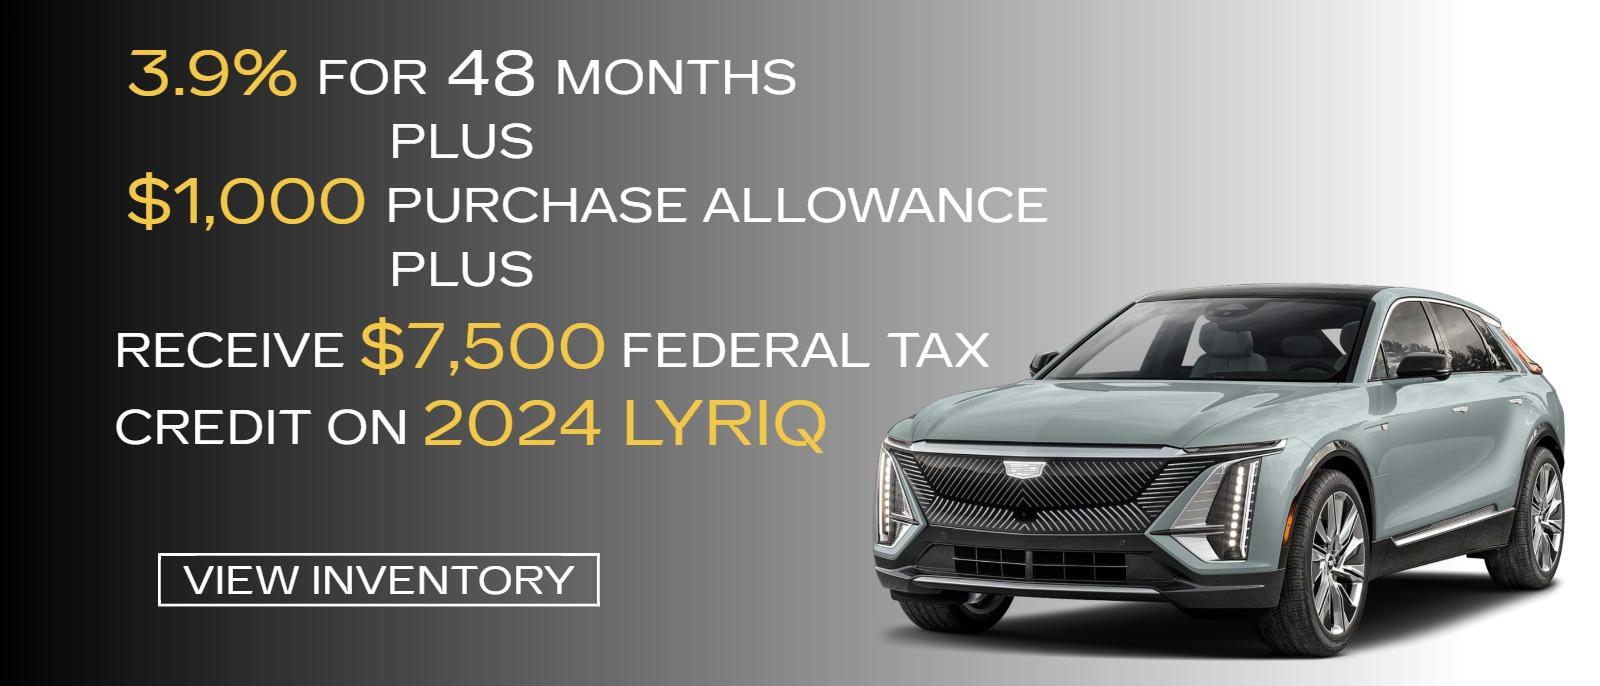 3.9% FOR 48 MONTHS PLUS $1000 PURCHASE ALLOWANCE PLUS RECEIVE $7500 FEDERAL TAX CREDIT ON 2024 LYRIQ